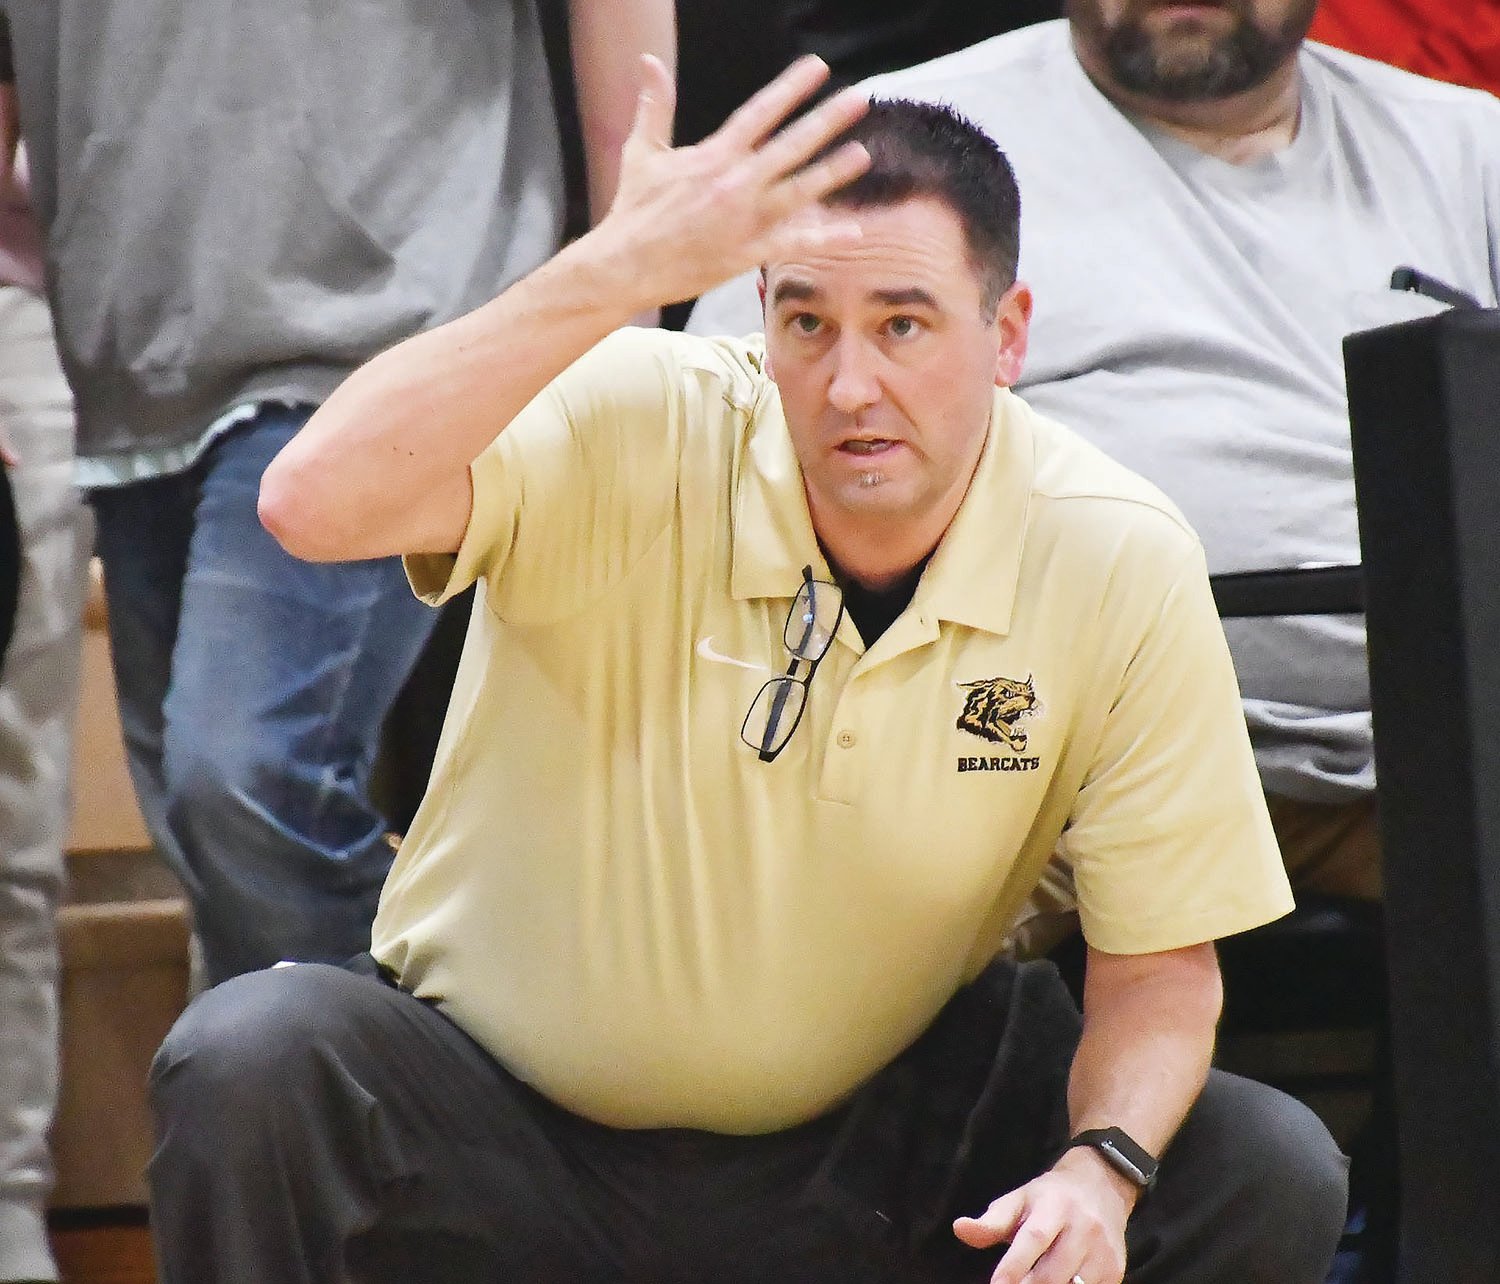 Cairo head boys basketball coach Nic Zenker motions from the sideline during Friday's Central Activities Conference game.